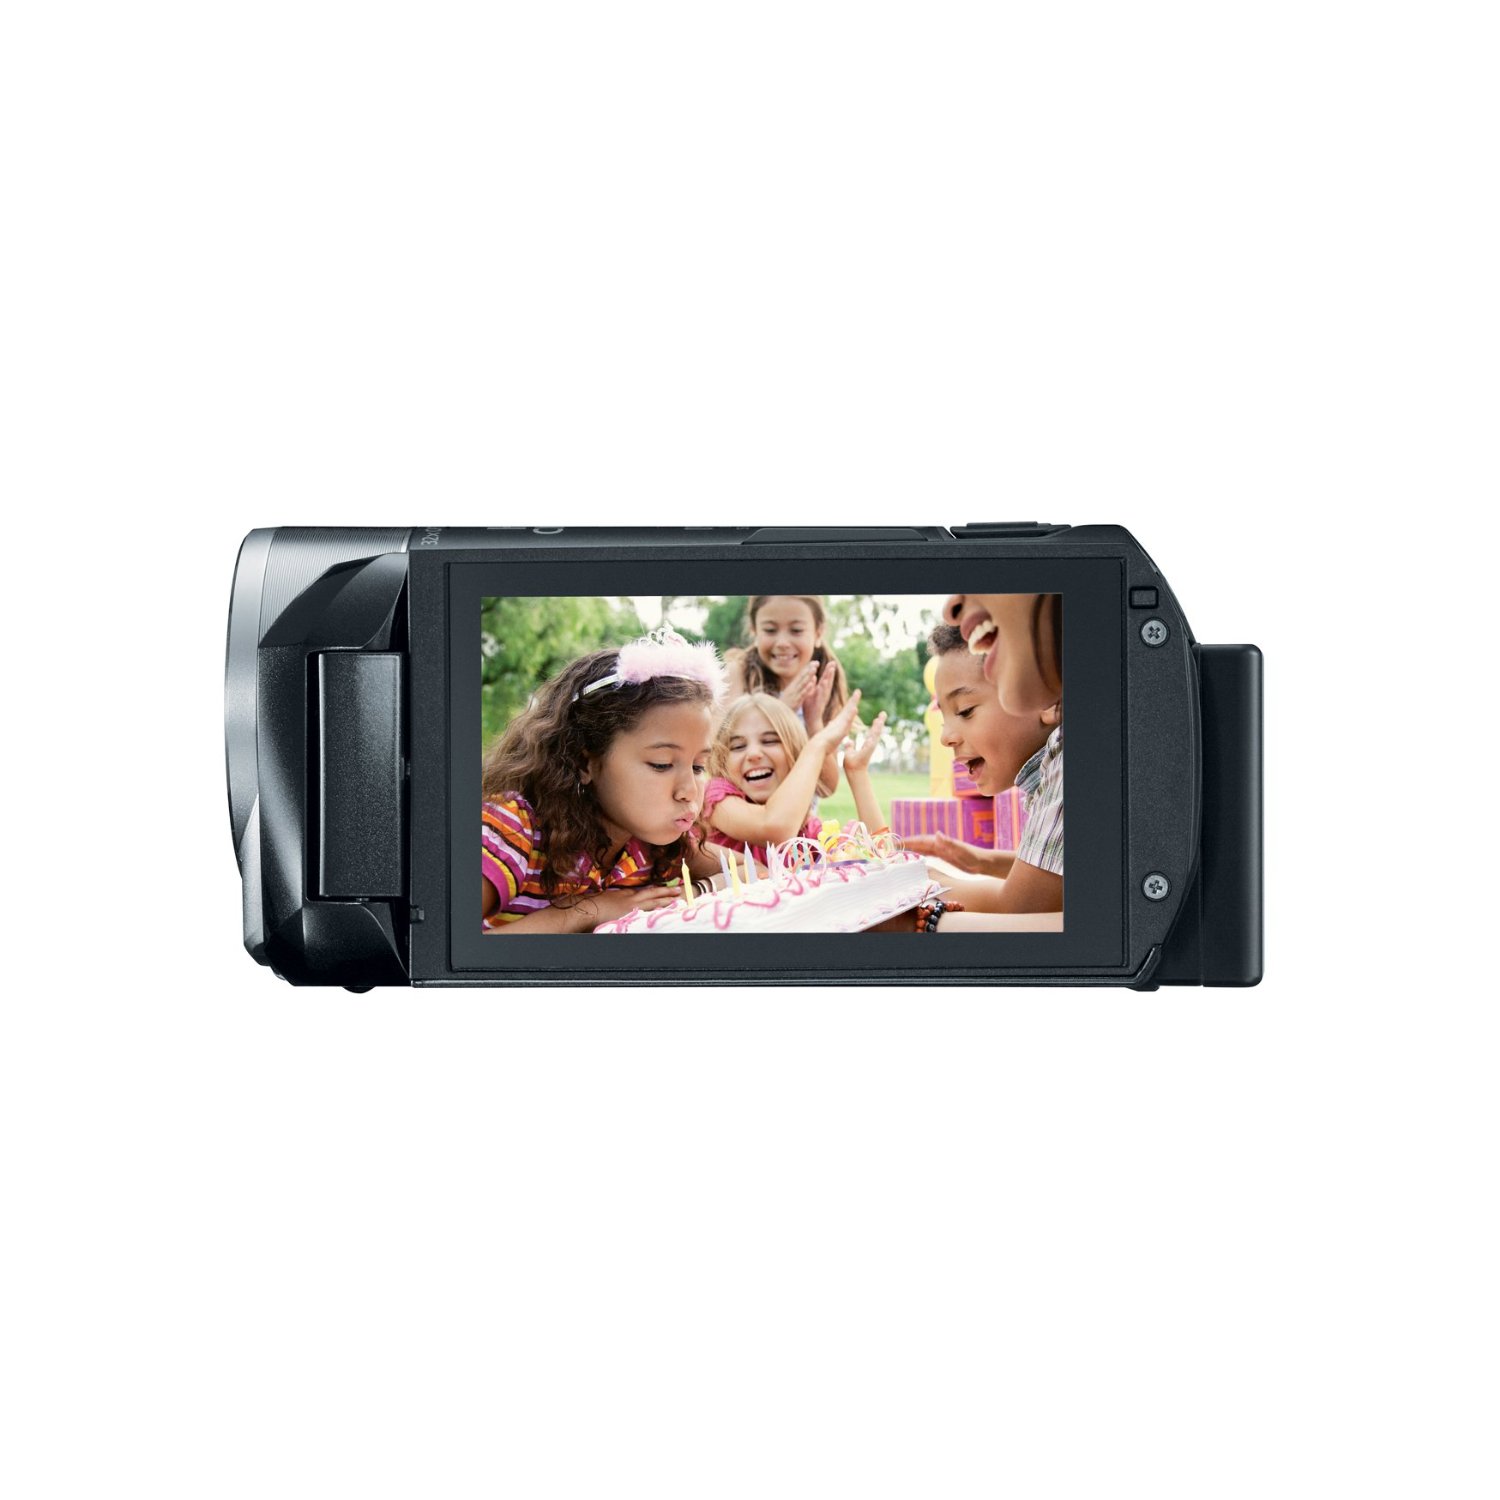 http://thetechjournal.com/wp-content/uploads/images/1202/1328098403-canon-vixia-hf-r300-full-hd-51x-image-stabilized-optical-zoom-camcorder-10.jpg